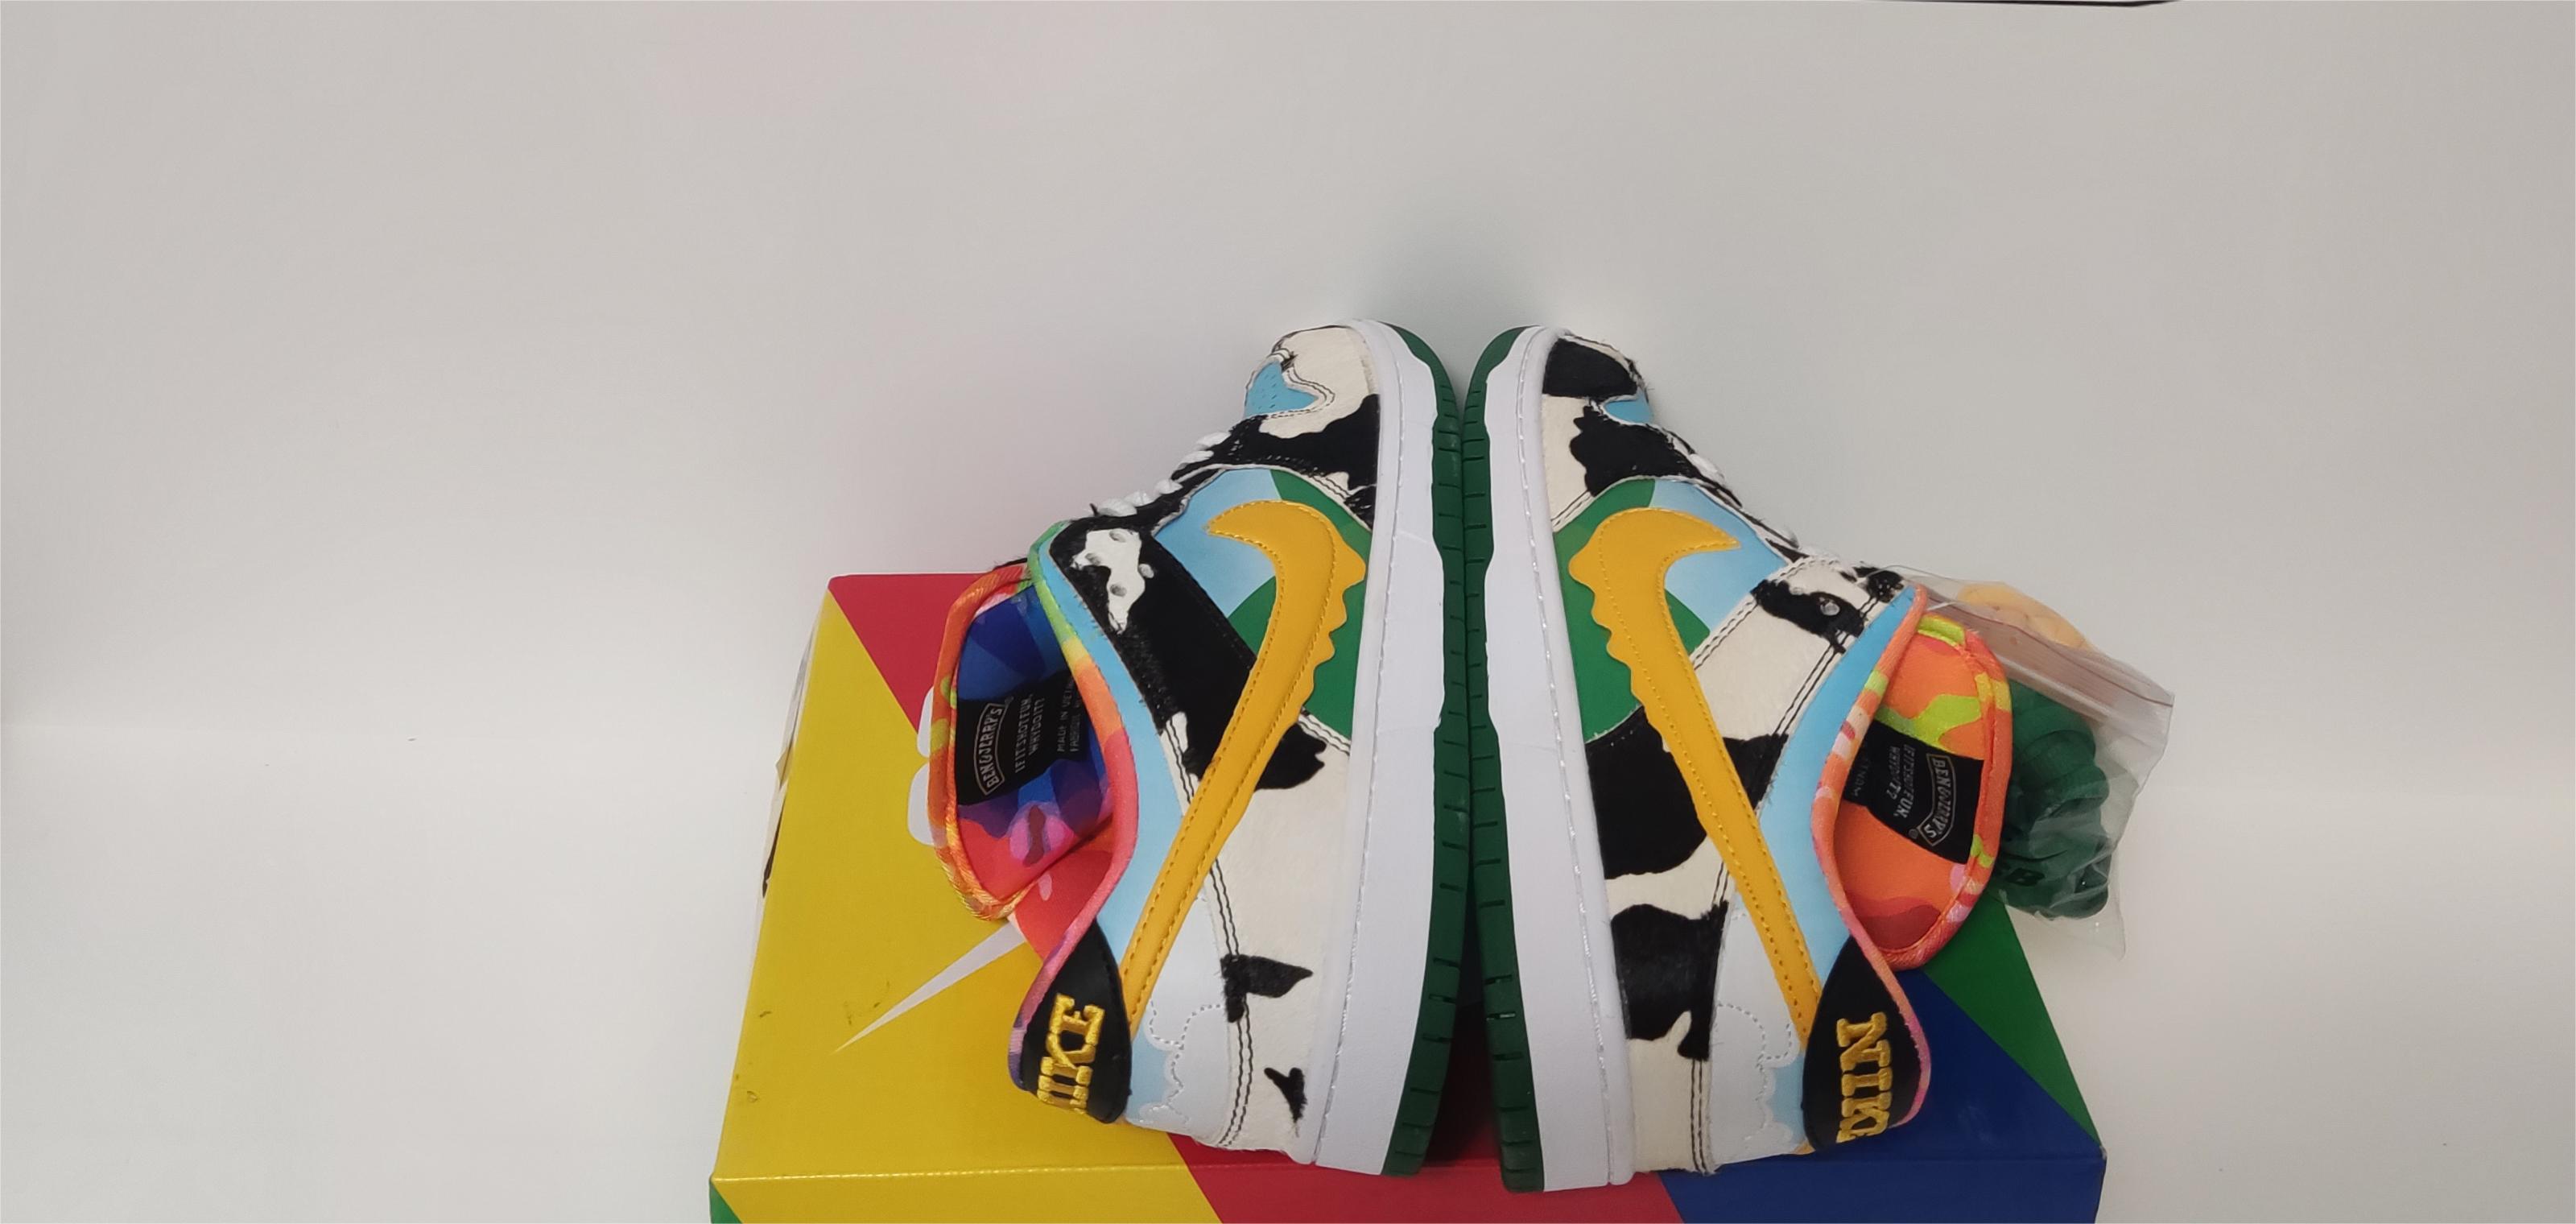 QC for OG Nike SB Dunk Low Ben & Jerry's Chunky Dunky CU3244-100